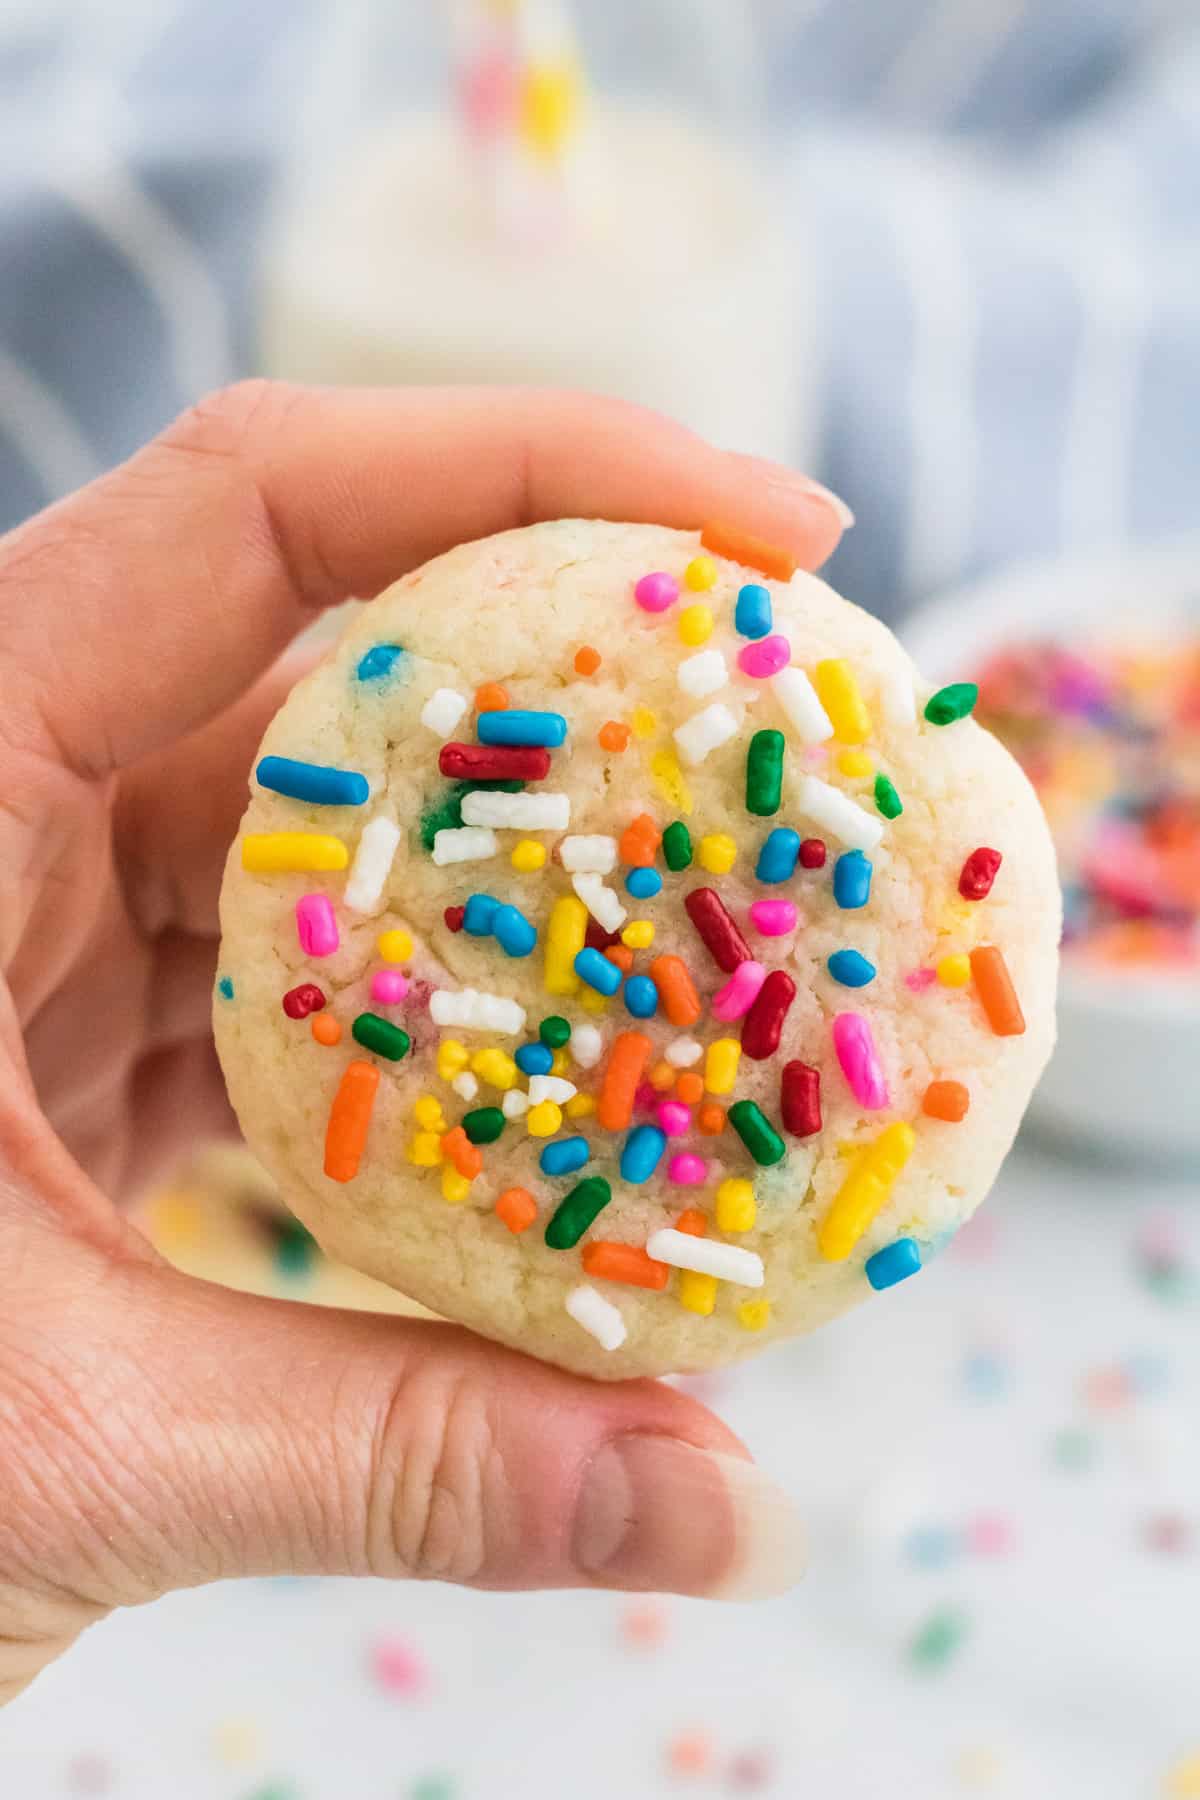 Hand holding rainbow sprinkle funfetti cookie made with cake mix.